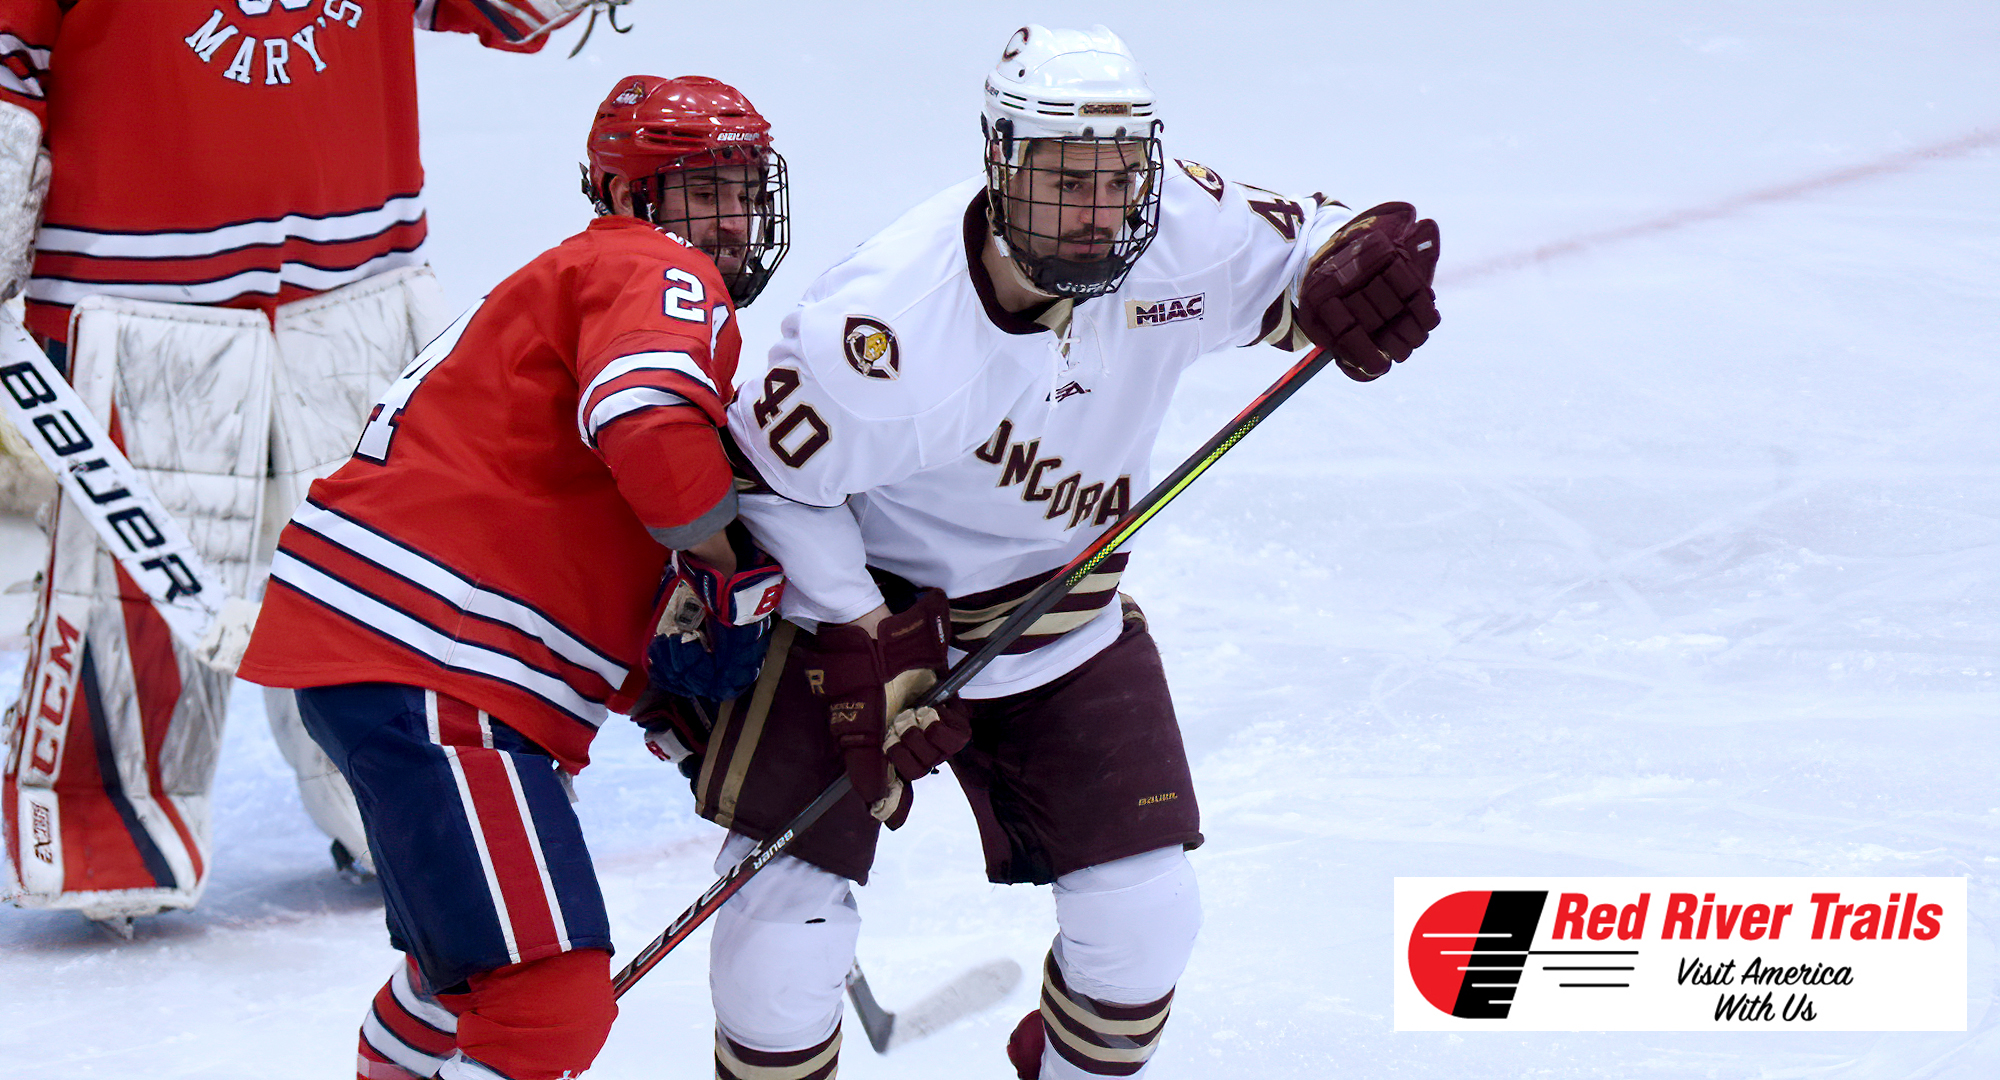 Matt Donnelly collected the lone goal for the Cobbers in their 3-1 loss in the season opener at St. Mary's.